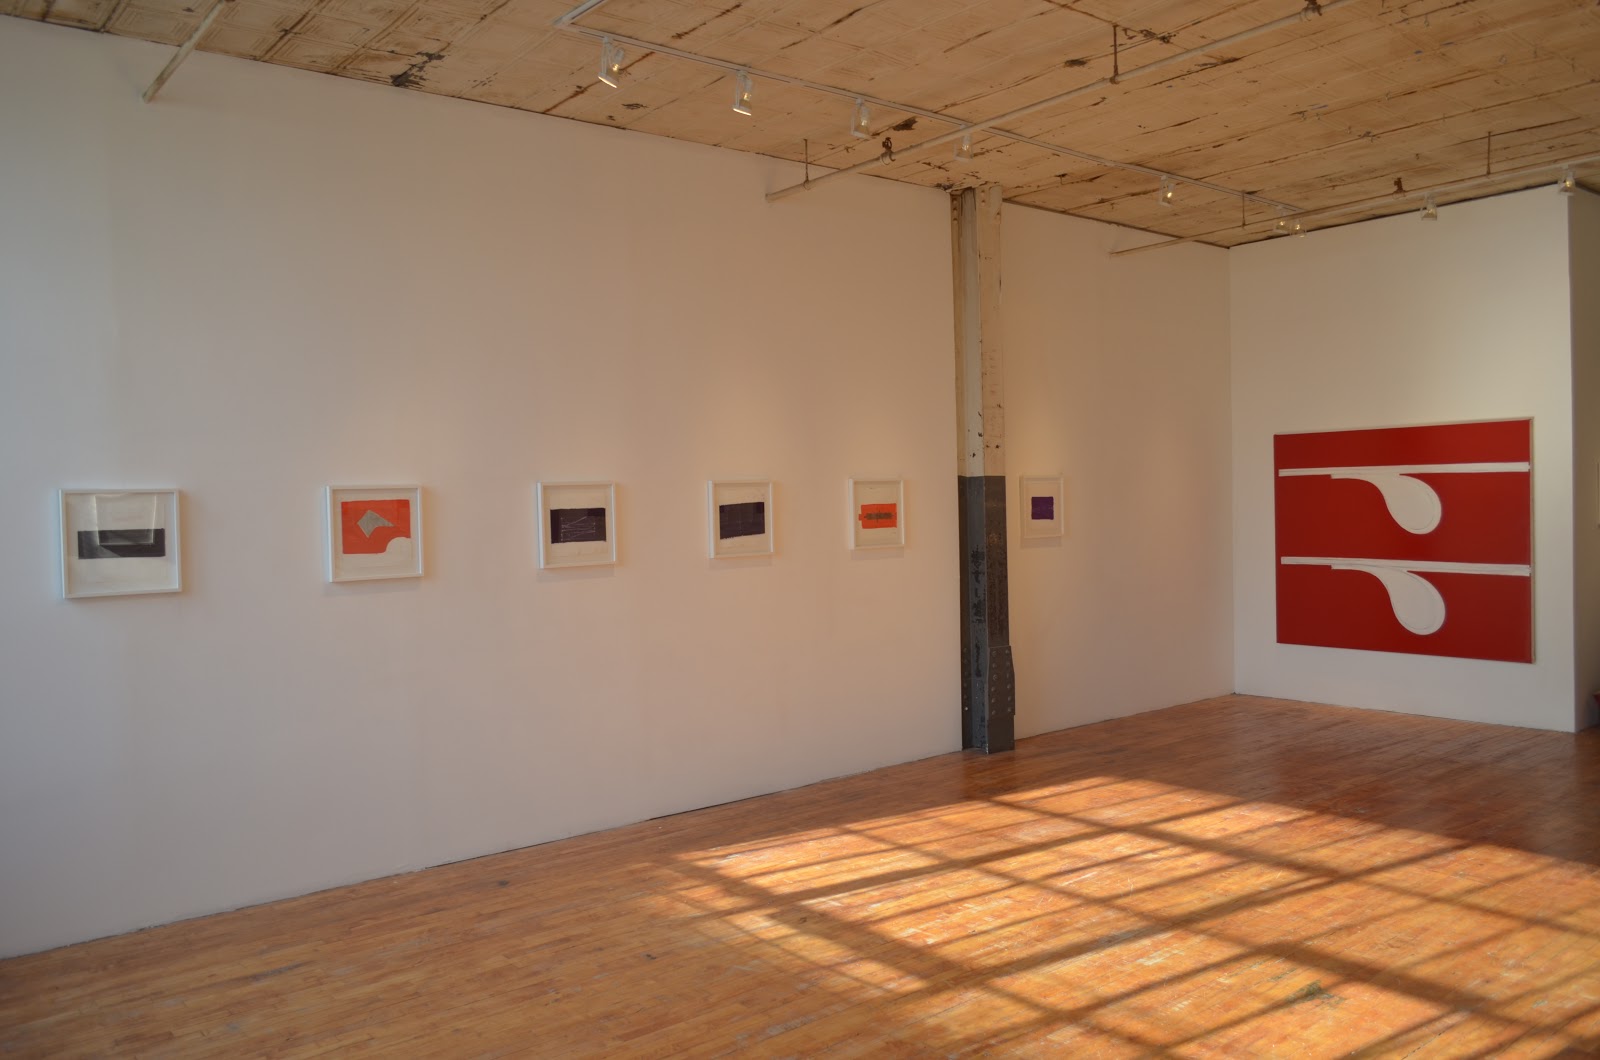  Studio 10, NY: 18 drawings and 1 painting, 2013